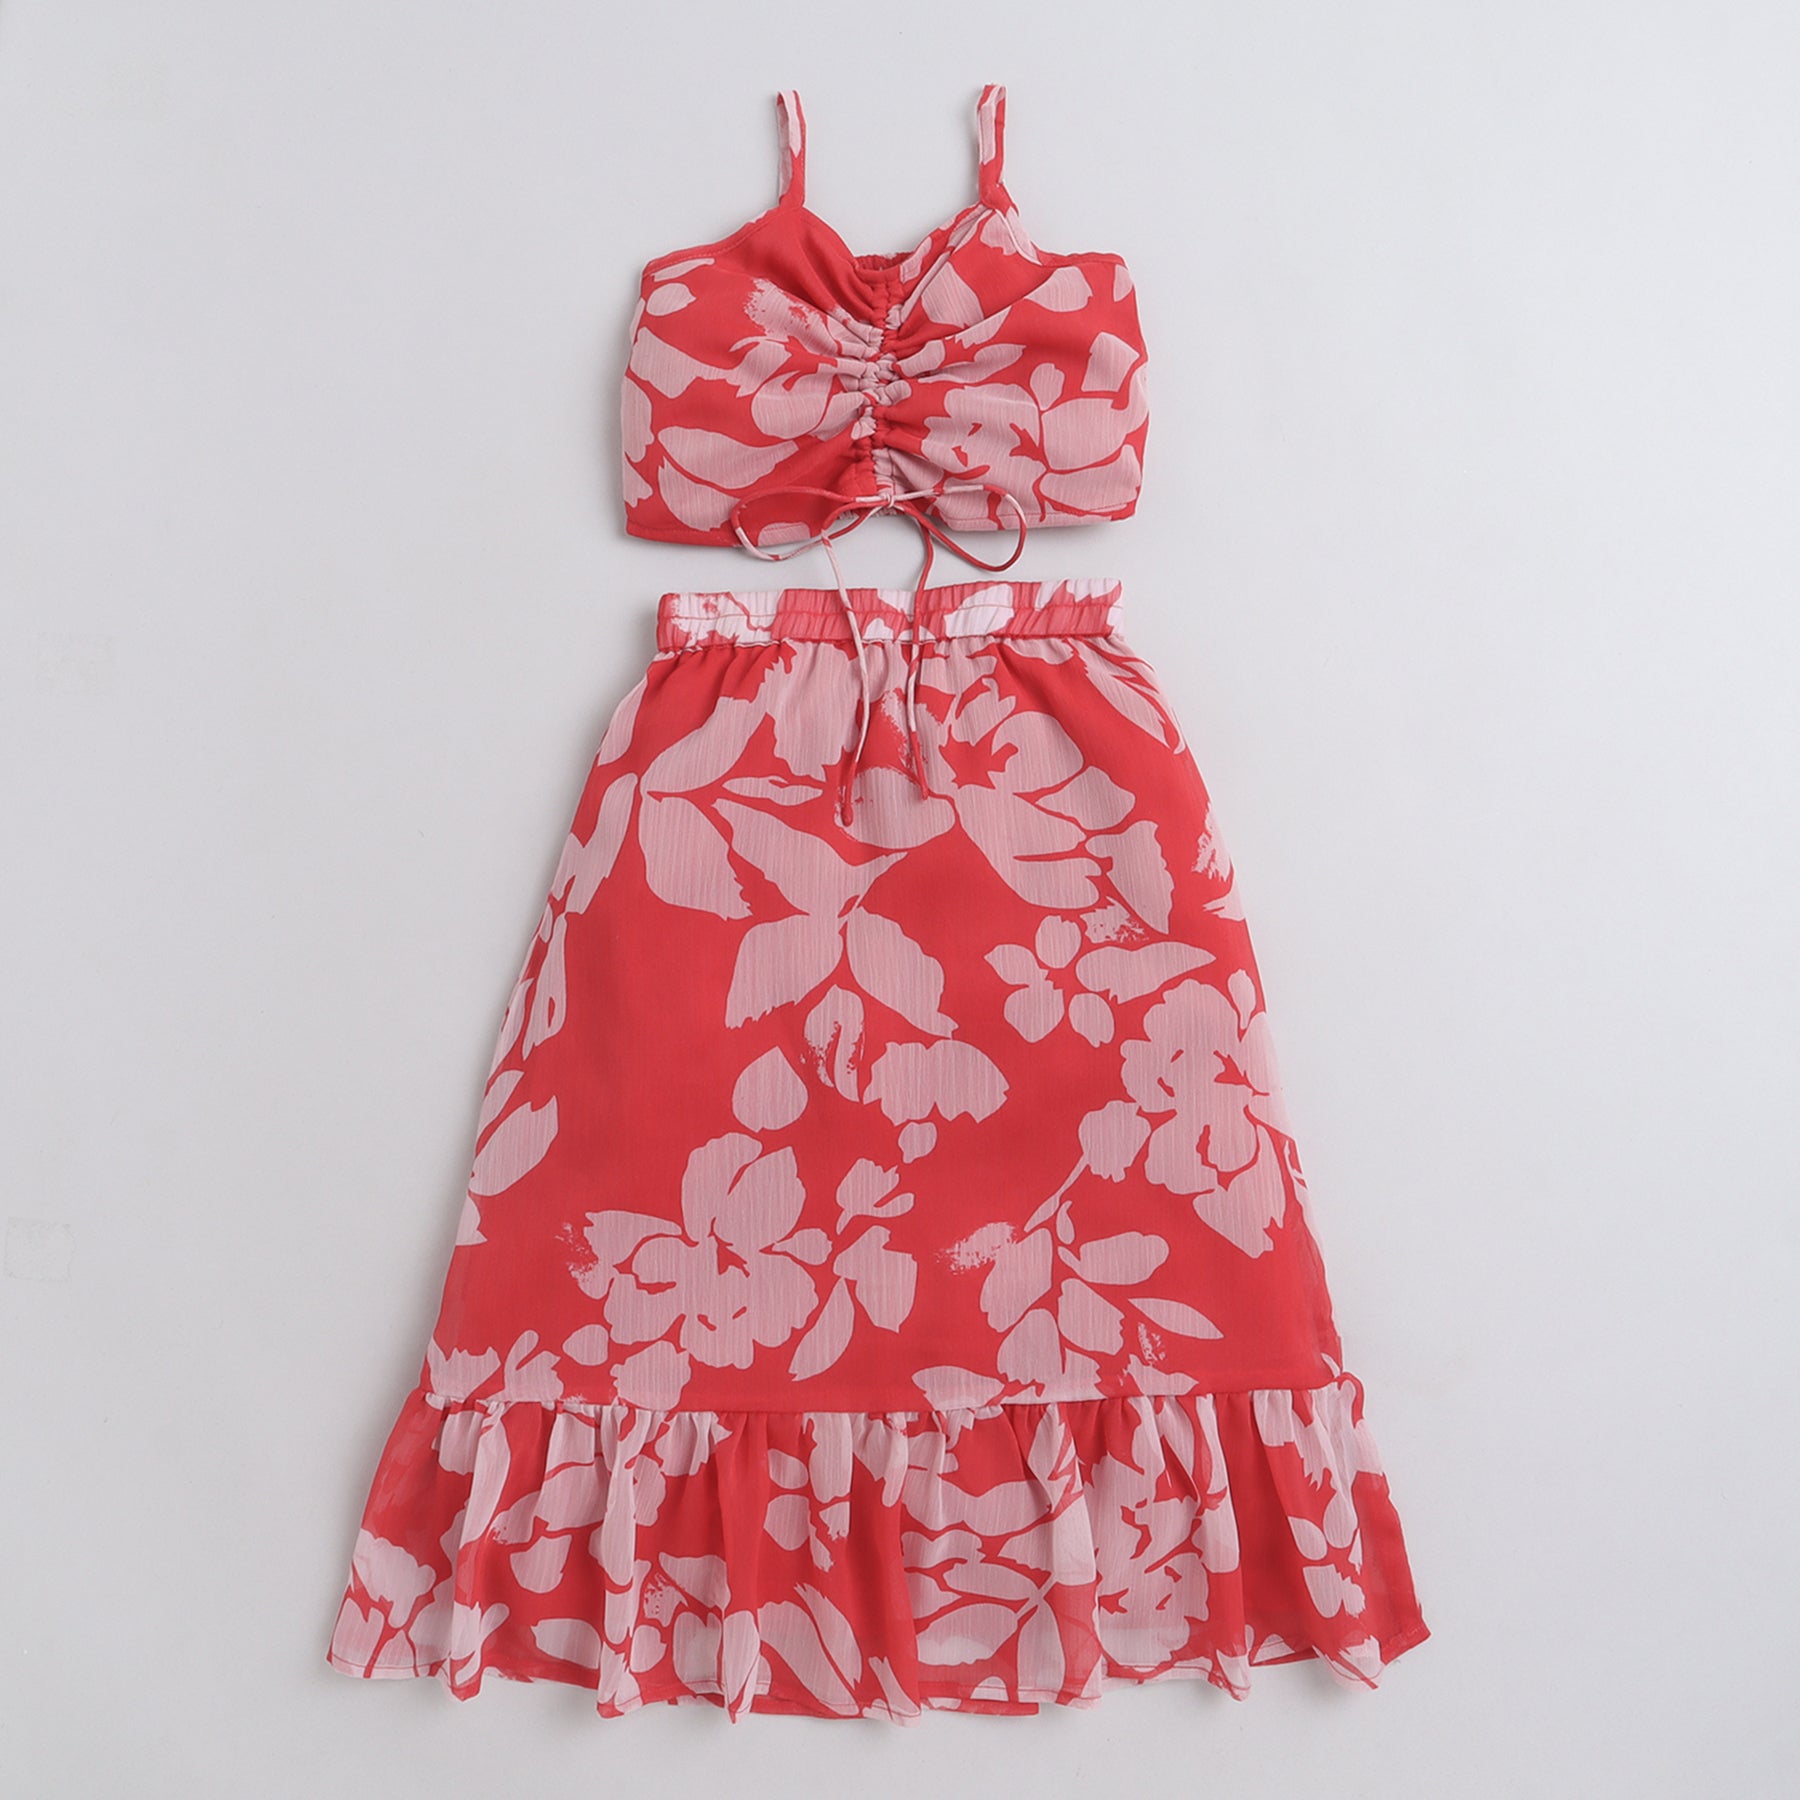 Taffykids ethnic floral printed sleeveless rushed top and tiered skirt set - Red